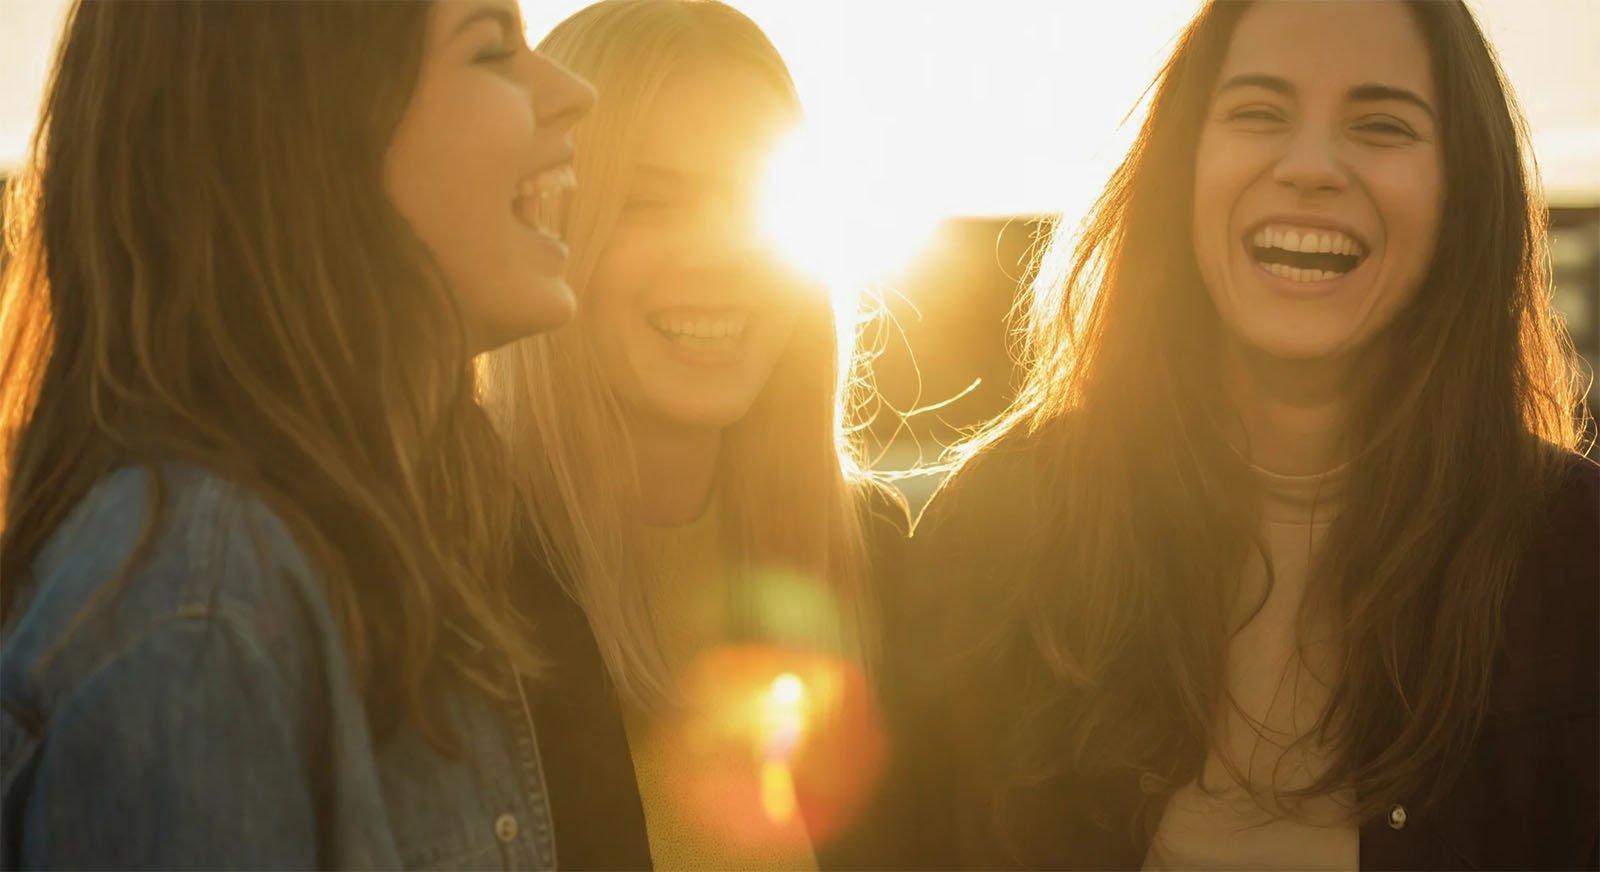 Three women are laughing and standing close together in the foreground, illuminated by warm sunlight from a low horizon behind them. The light creates a lens flare effect, highlighting their joyful expressions. They appear to be outdoors during sunset.